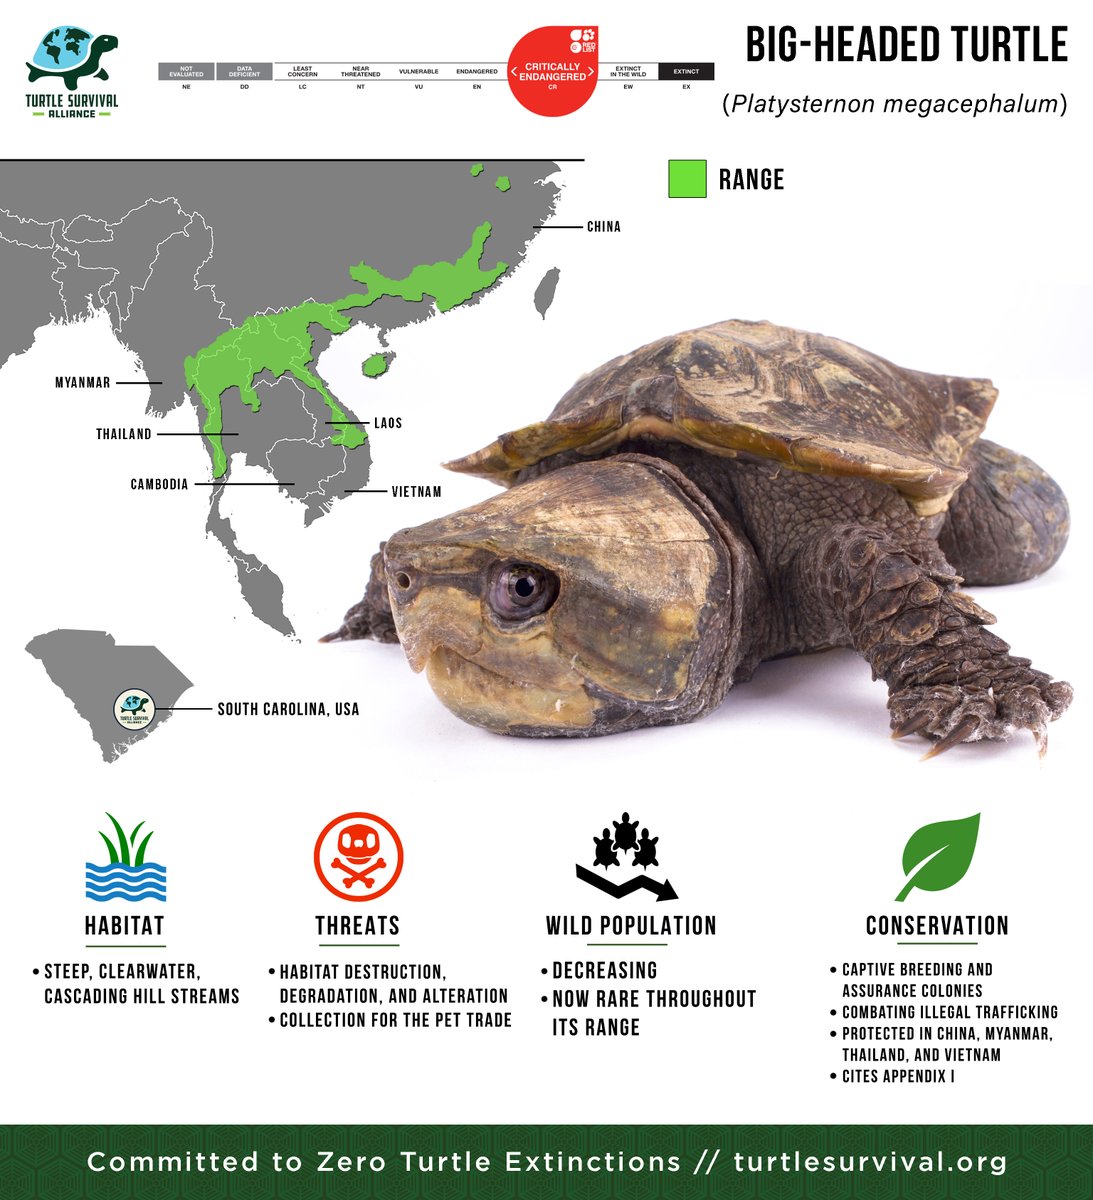 Today is #NationalSkilledTradesDay! Of all the species maintained at the Turtle Survival Center, the Big-headed Turtle takes the most skill  to maintain and breed! (Albeit an obscure and highly specialized skill set, it is a VERY important one!)

Common name: Big-headed Turtle,